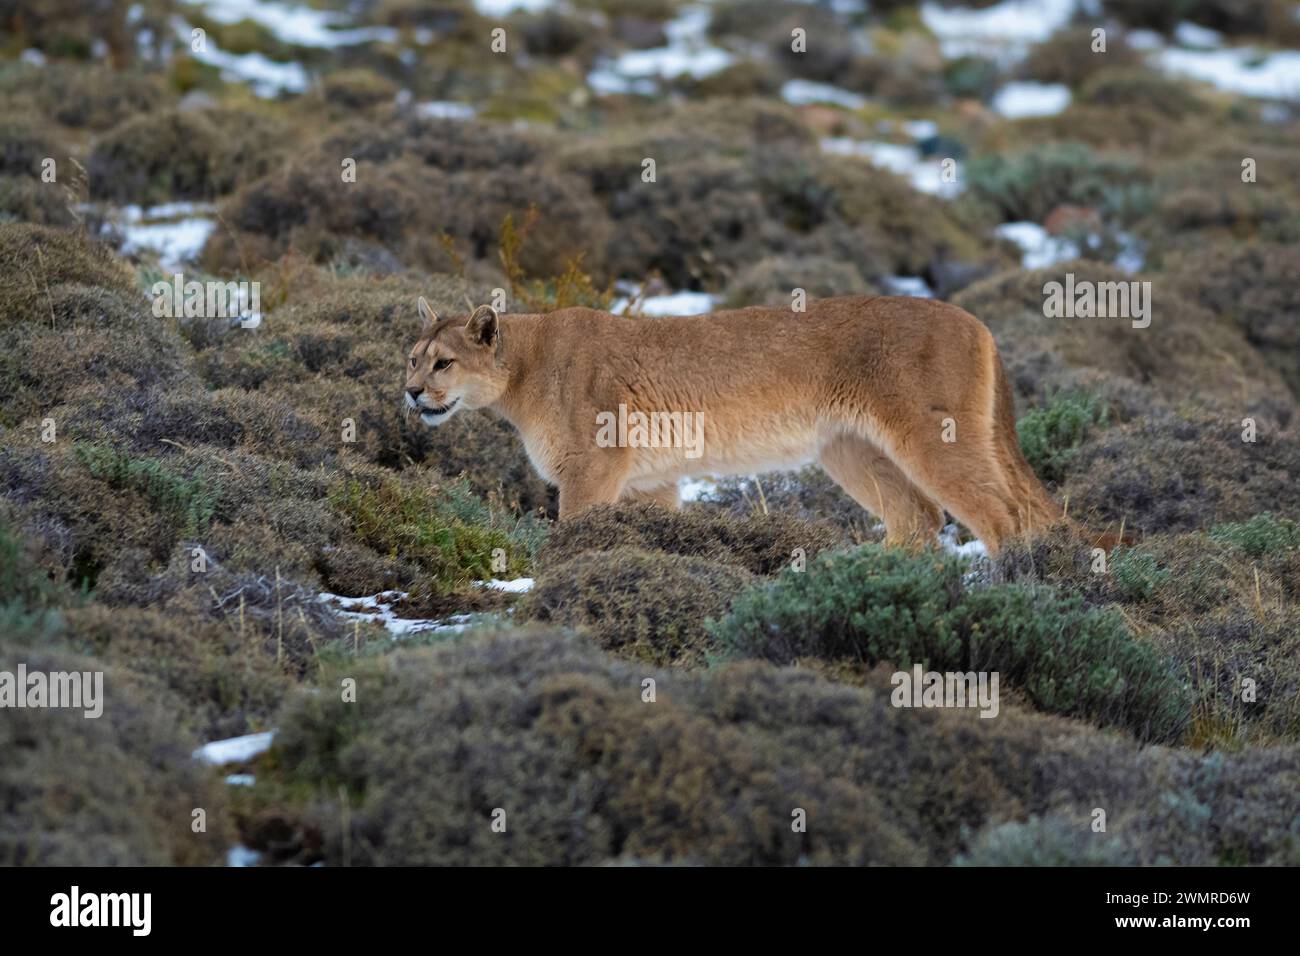 Cougar walking in mountain environment, Torres del Paine National Park, Patagonia, Chile. Stock Photo